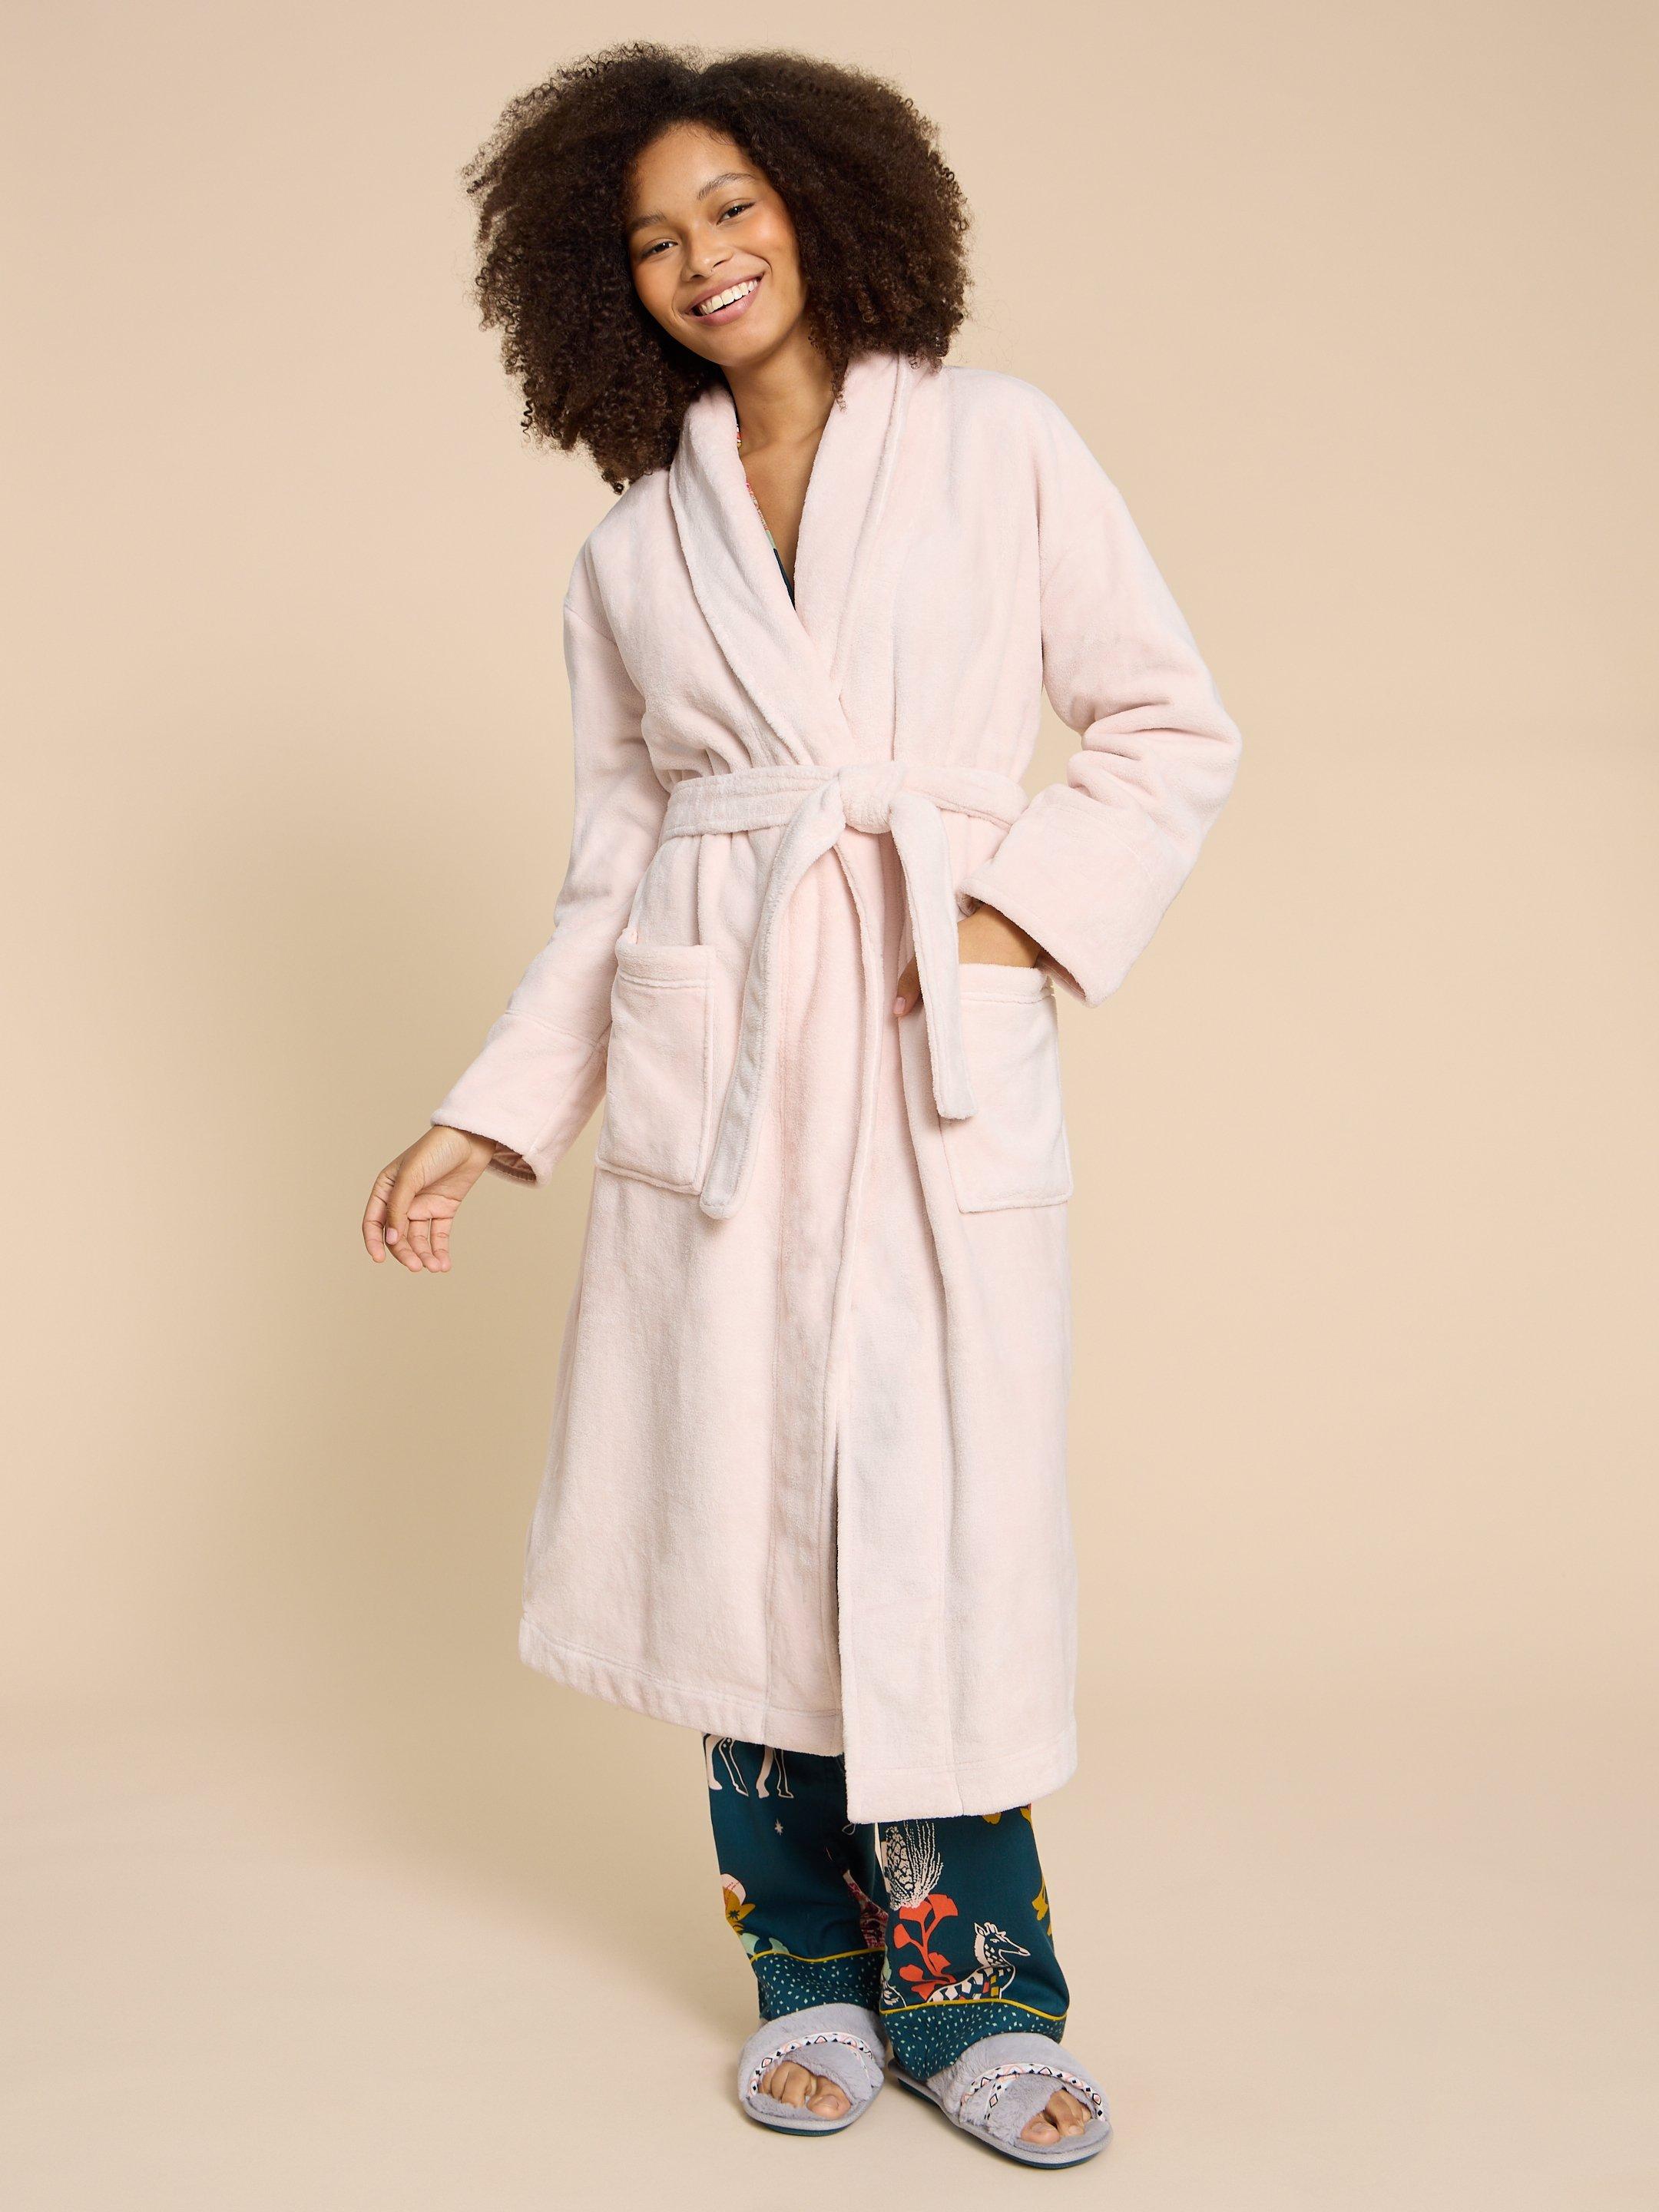 Clover Cosy Dressing Gown in LGT PINK - MODEL FRONT